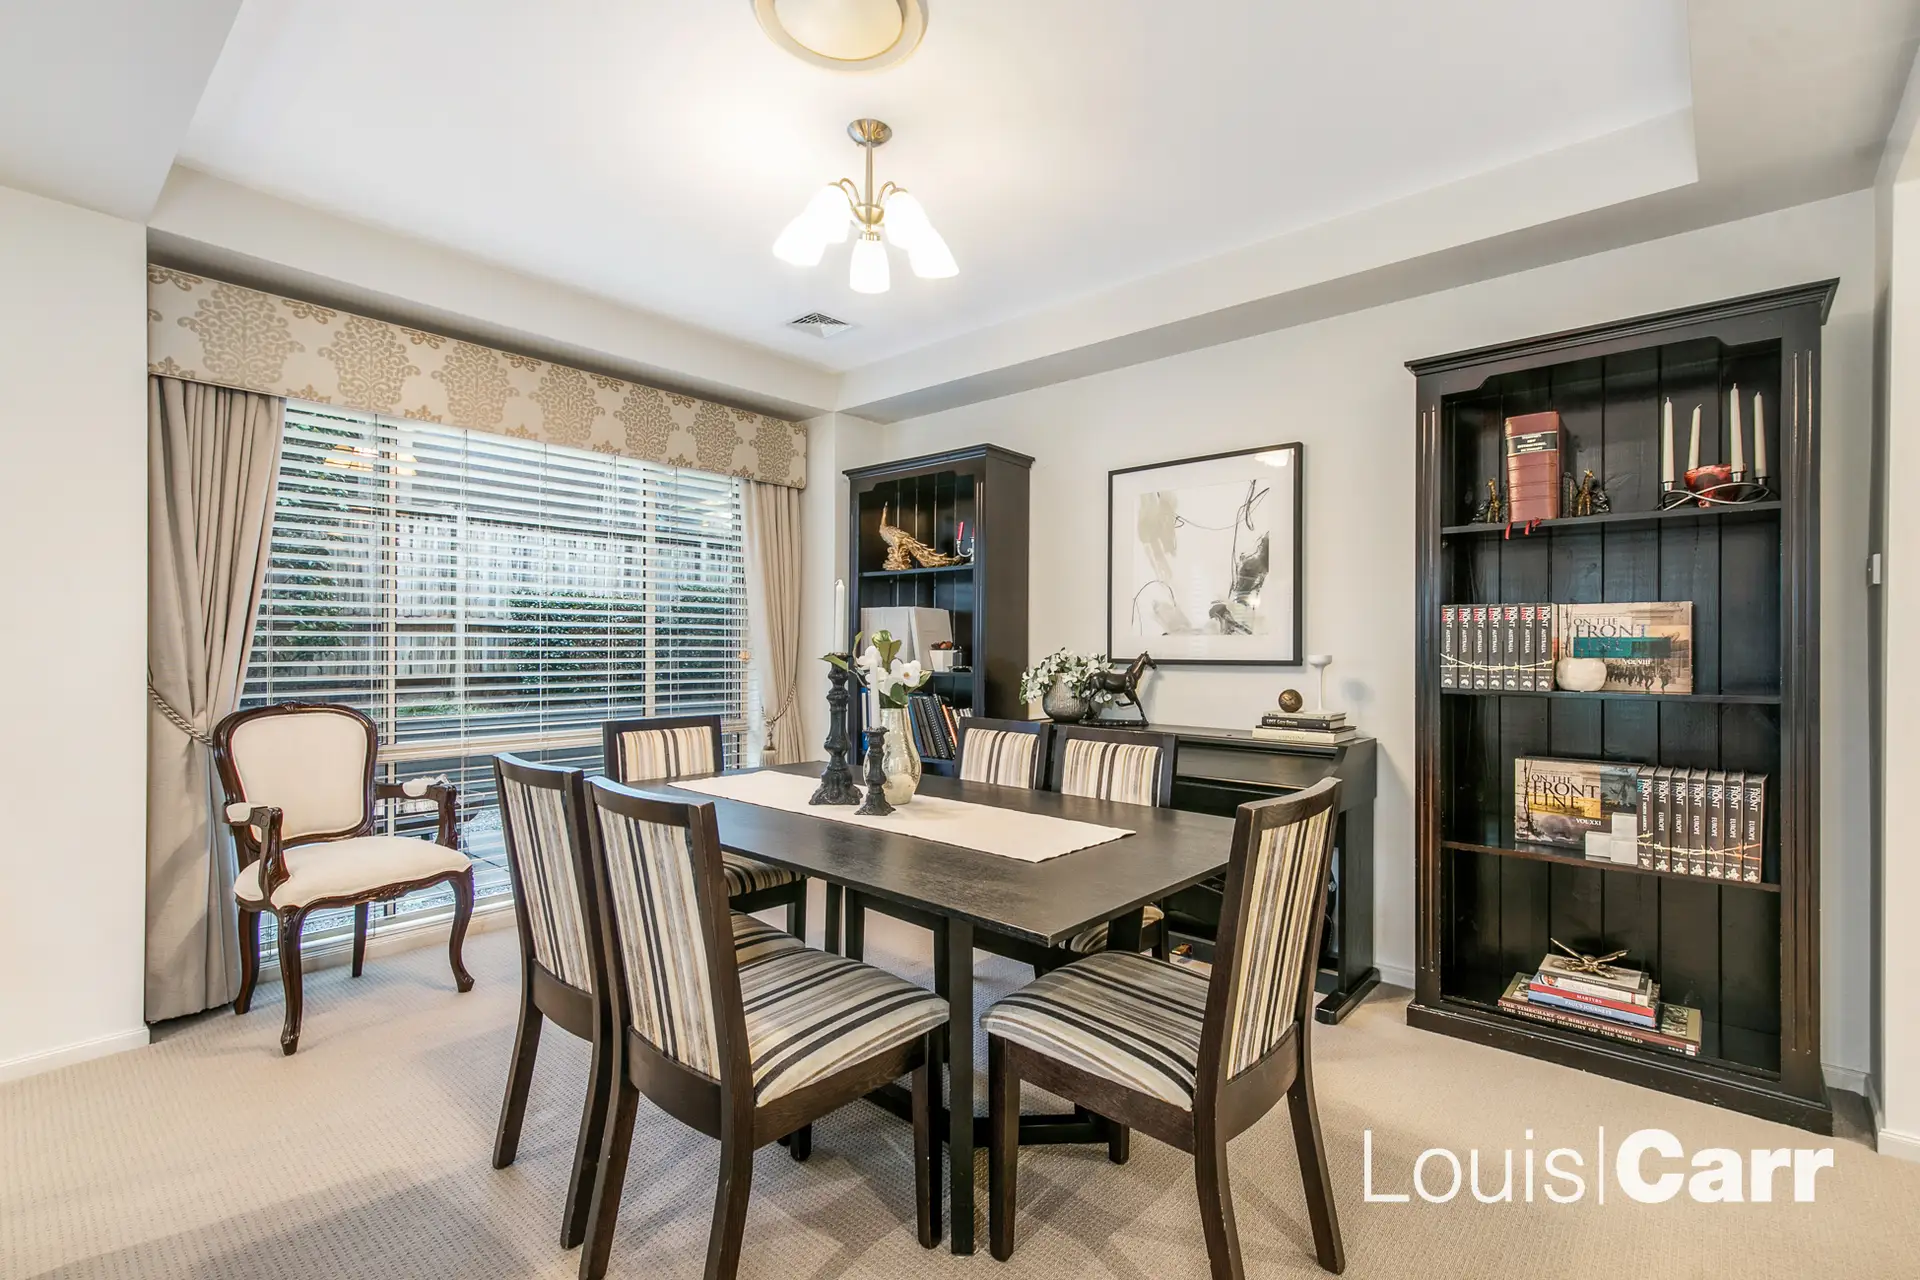 Photo #8: 15 Valda Street, West Pennant Hills - Sold by Louis Carr Real Estate